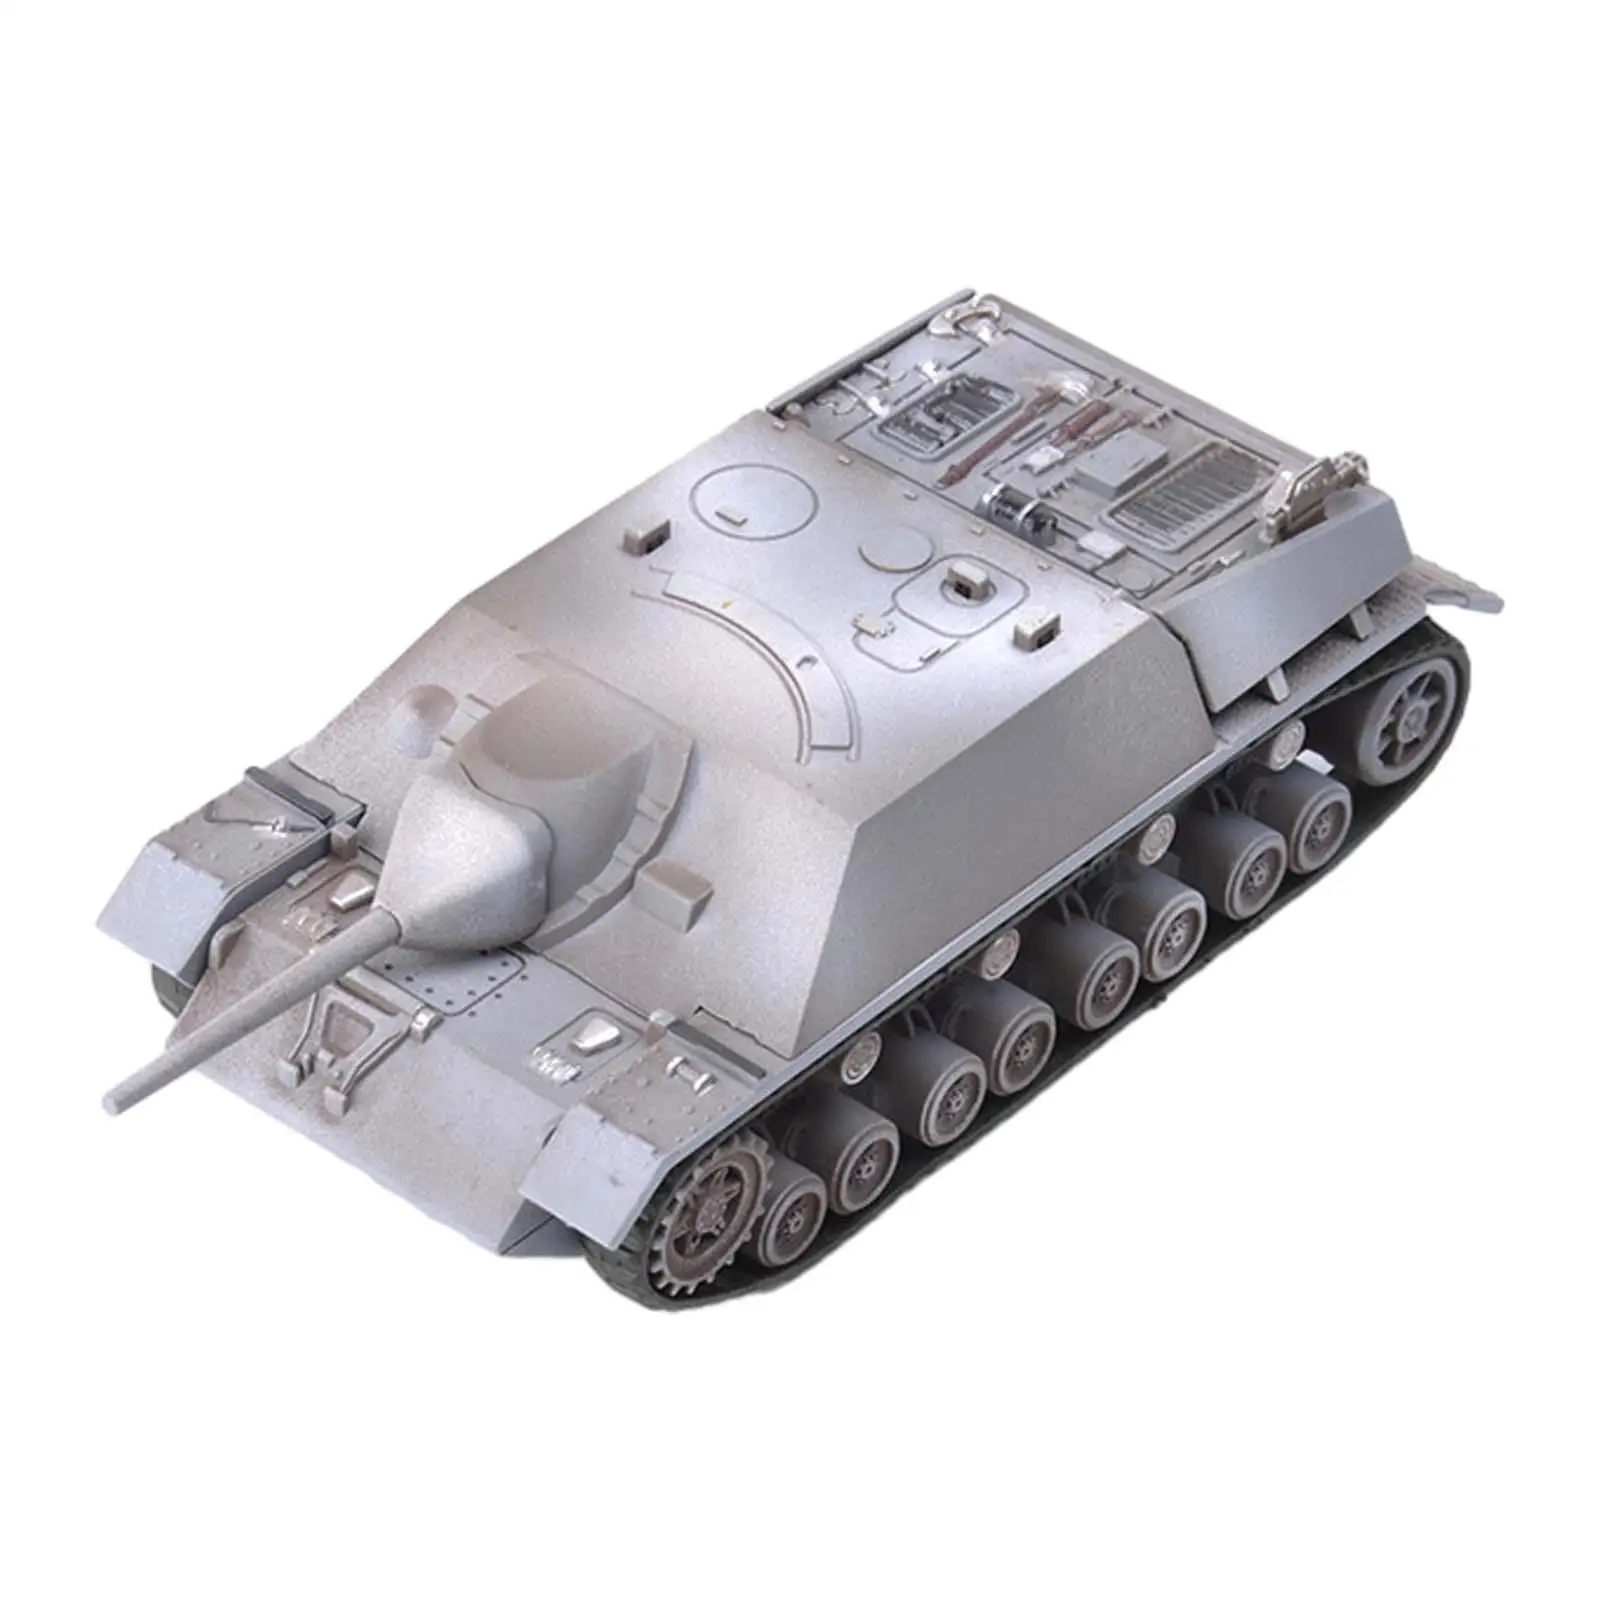 1:72 Scale Tank Model Kits DIY Assemble Table Scene Ornament Tabletop Decor Collectible for Adults Kids Children Boy Gifts